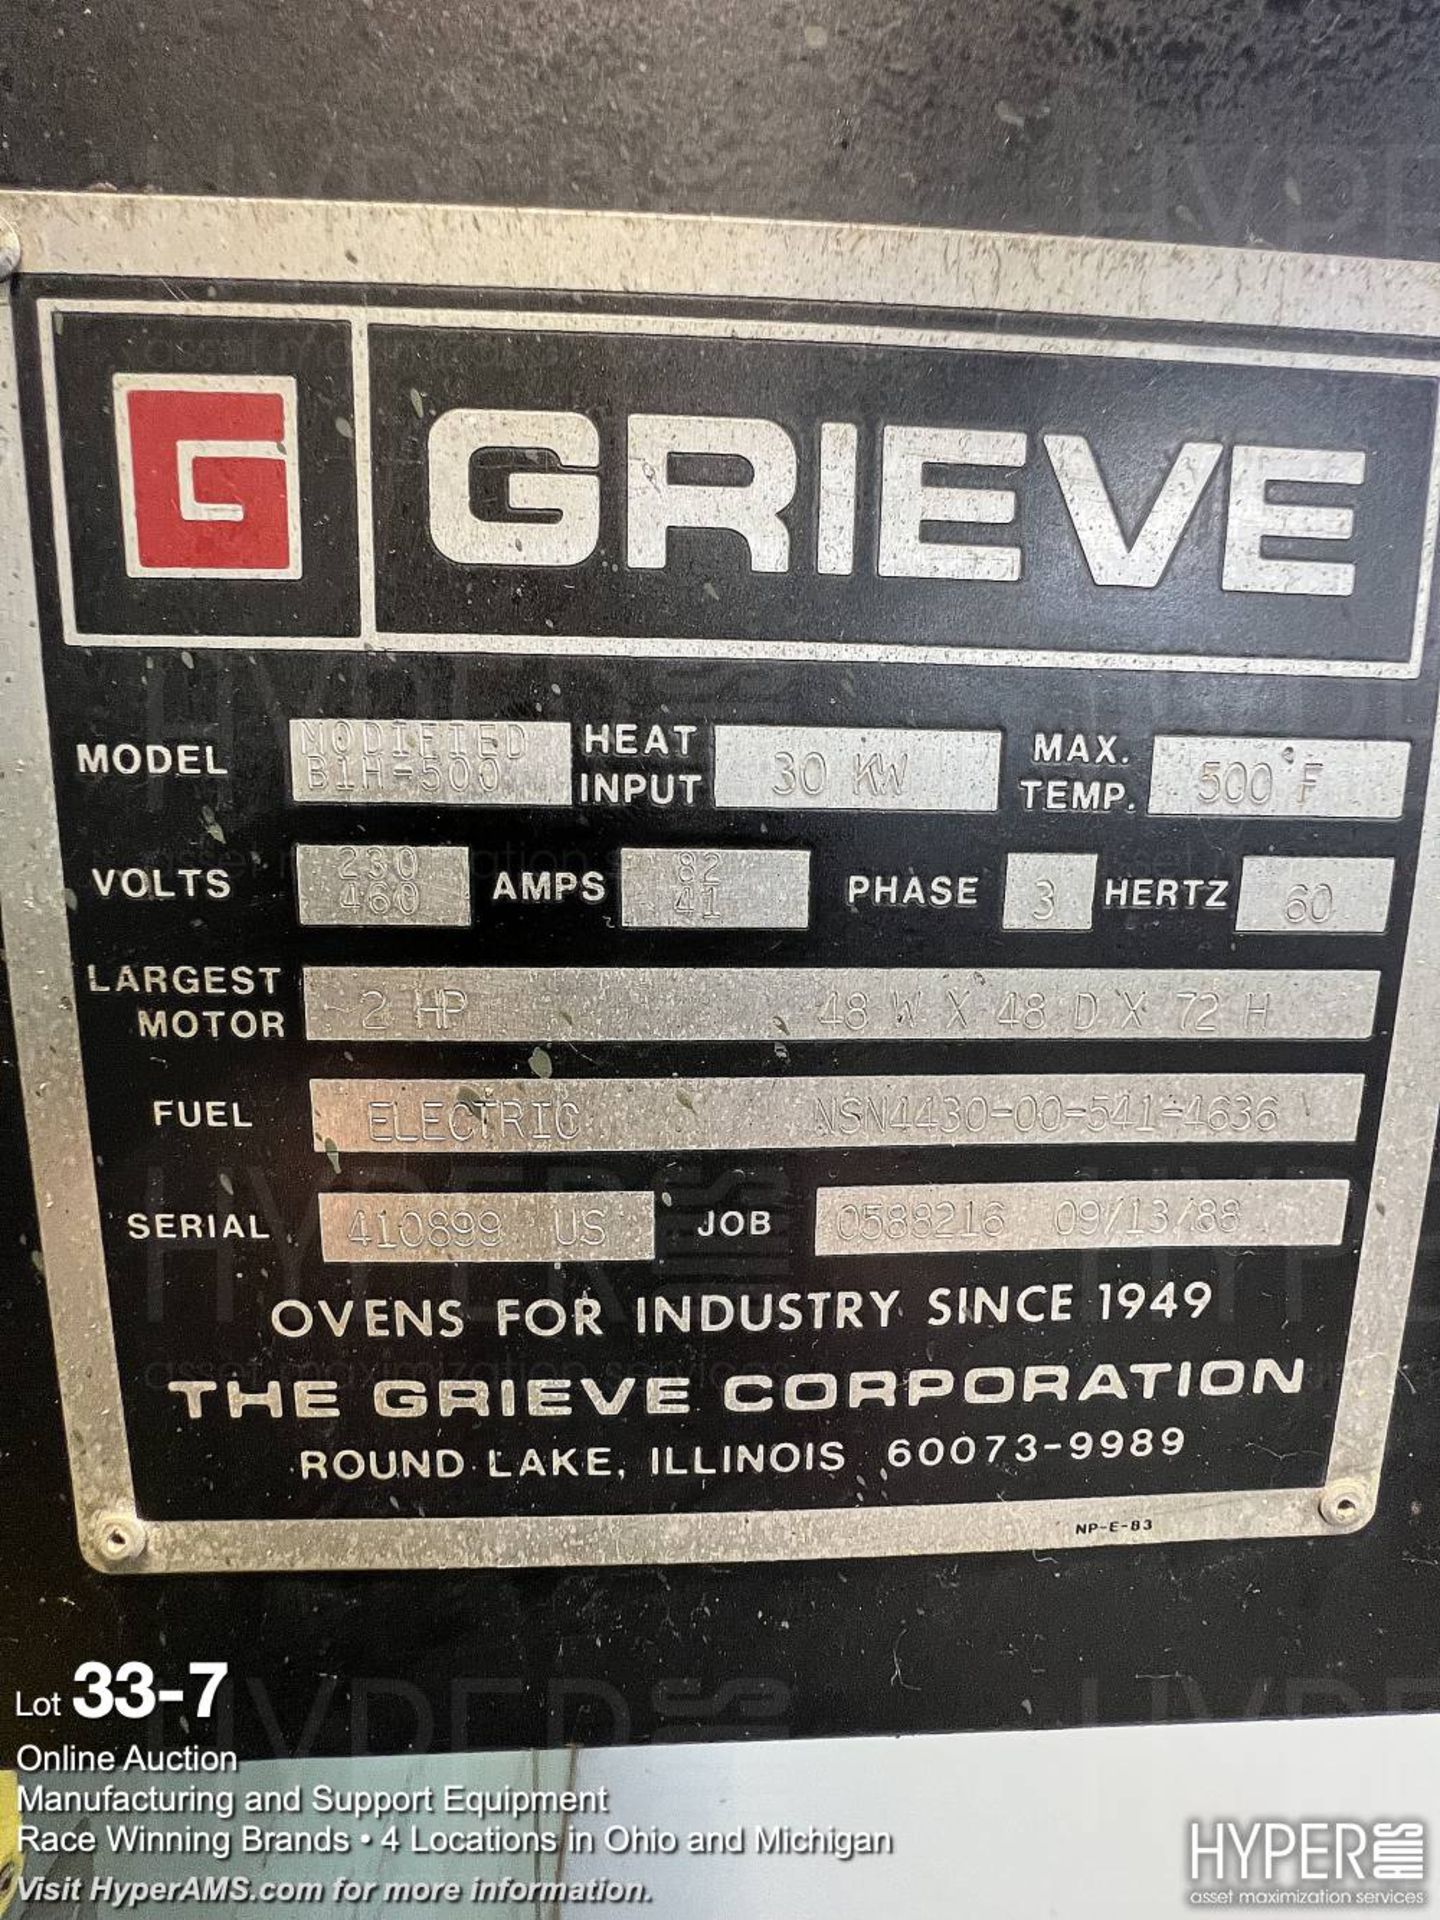 Grieve Oven B1H-500 - Image 7 of 7